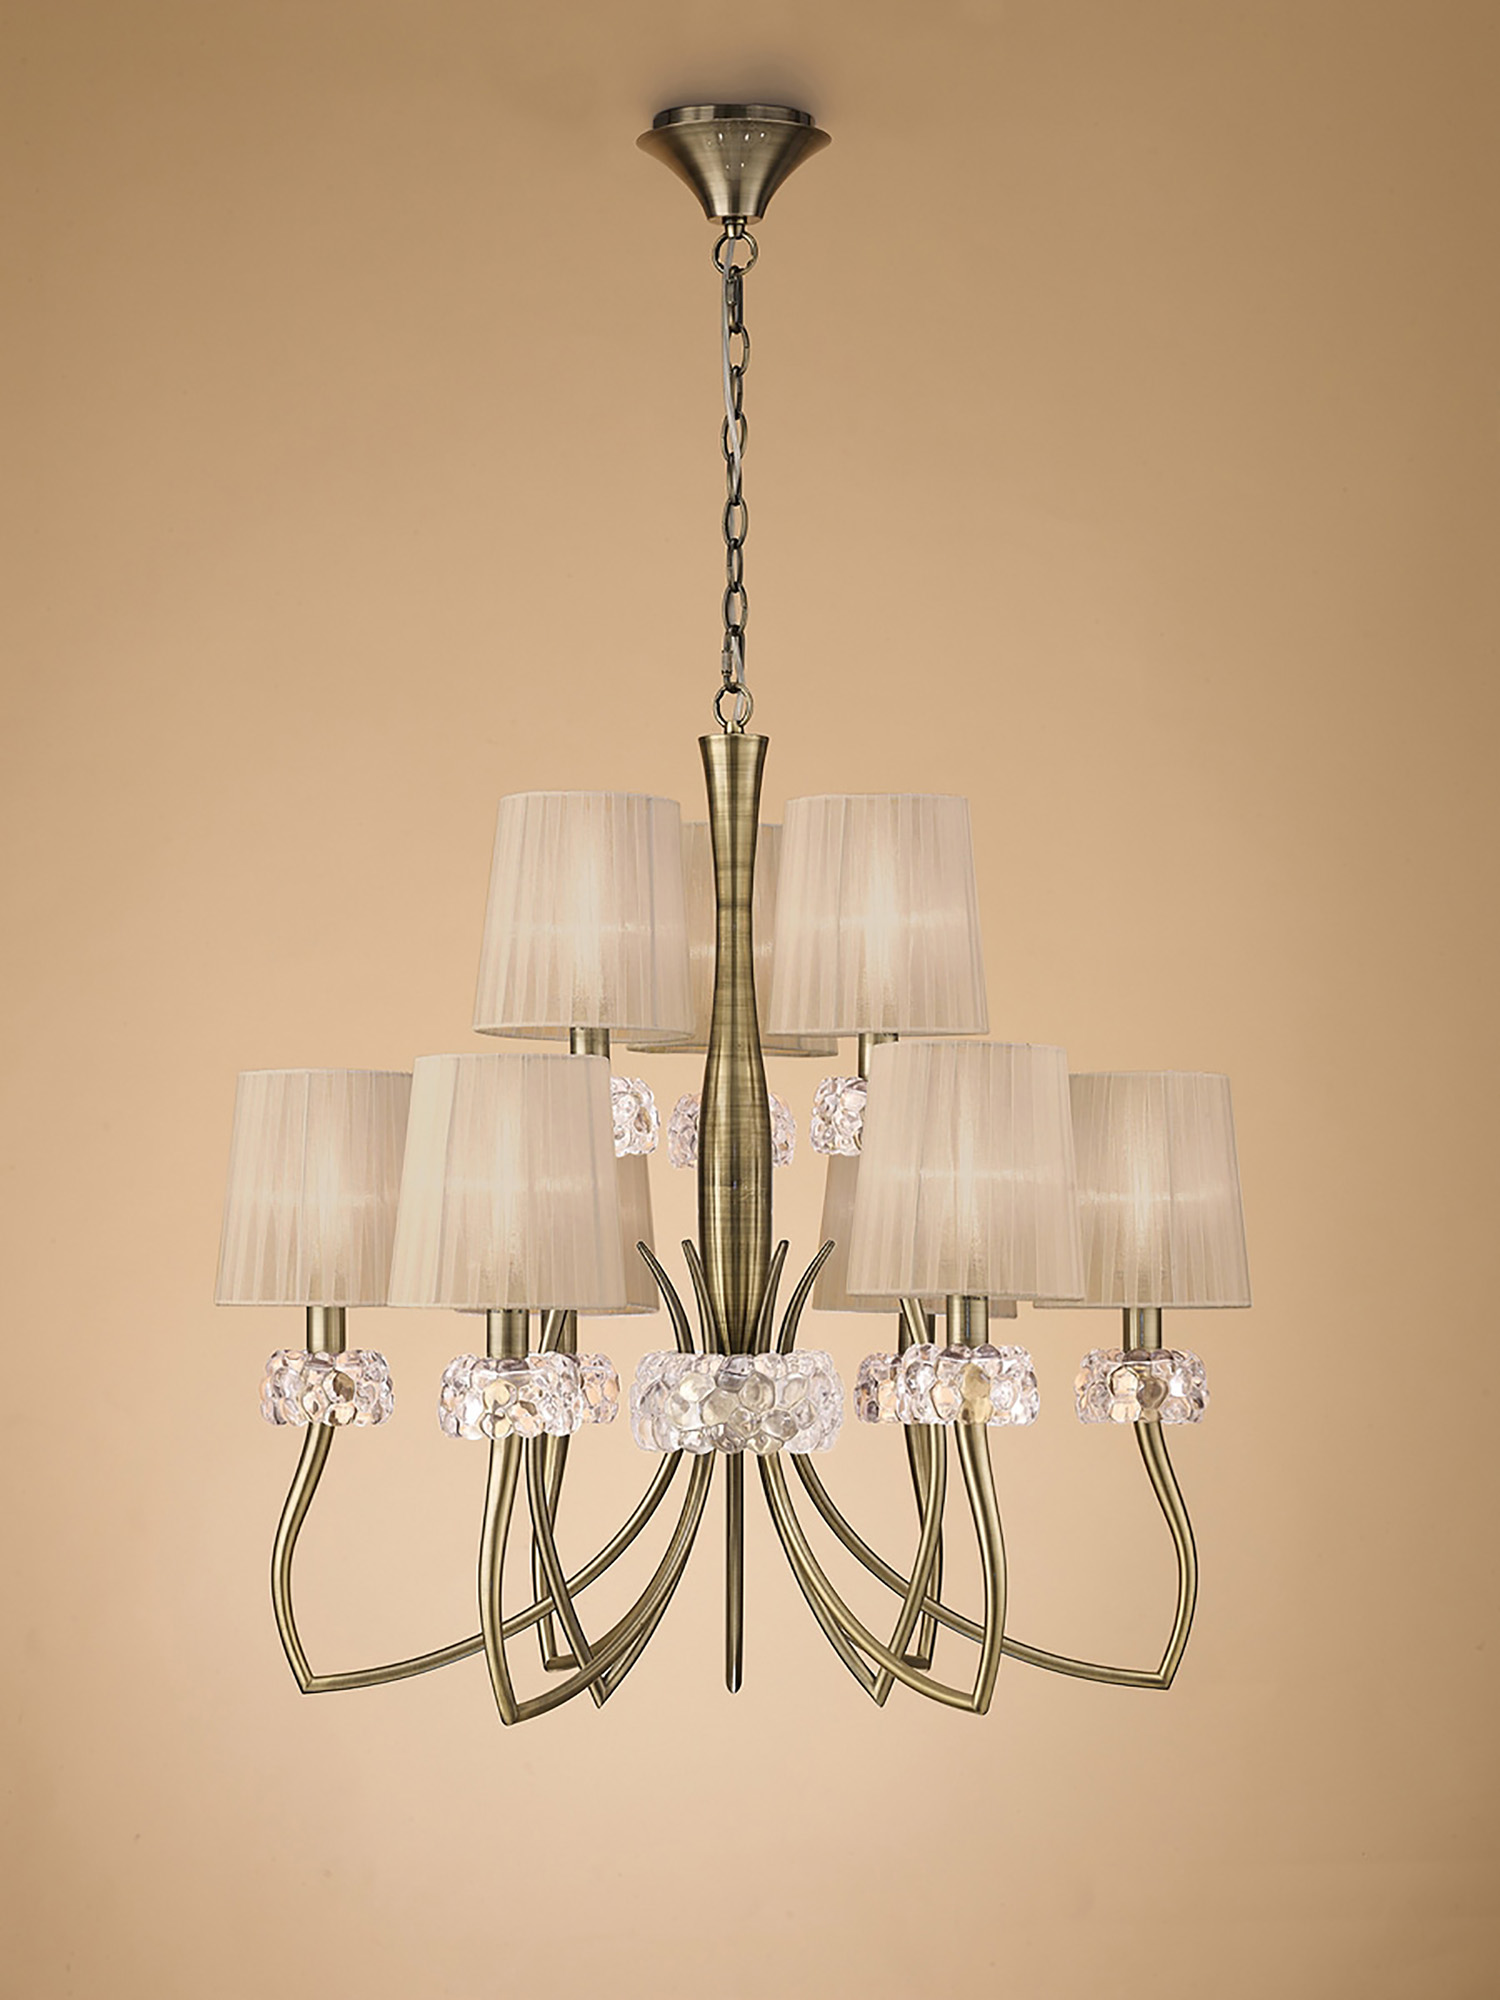 Loewe Antique Brass-Soft Bronze Ceiling Lights Mantra Multi Arm Fittings